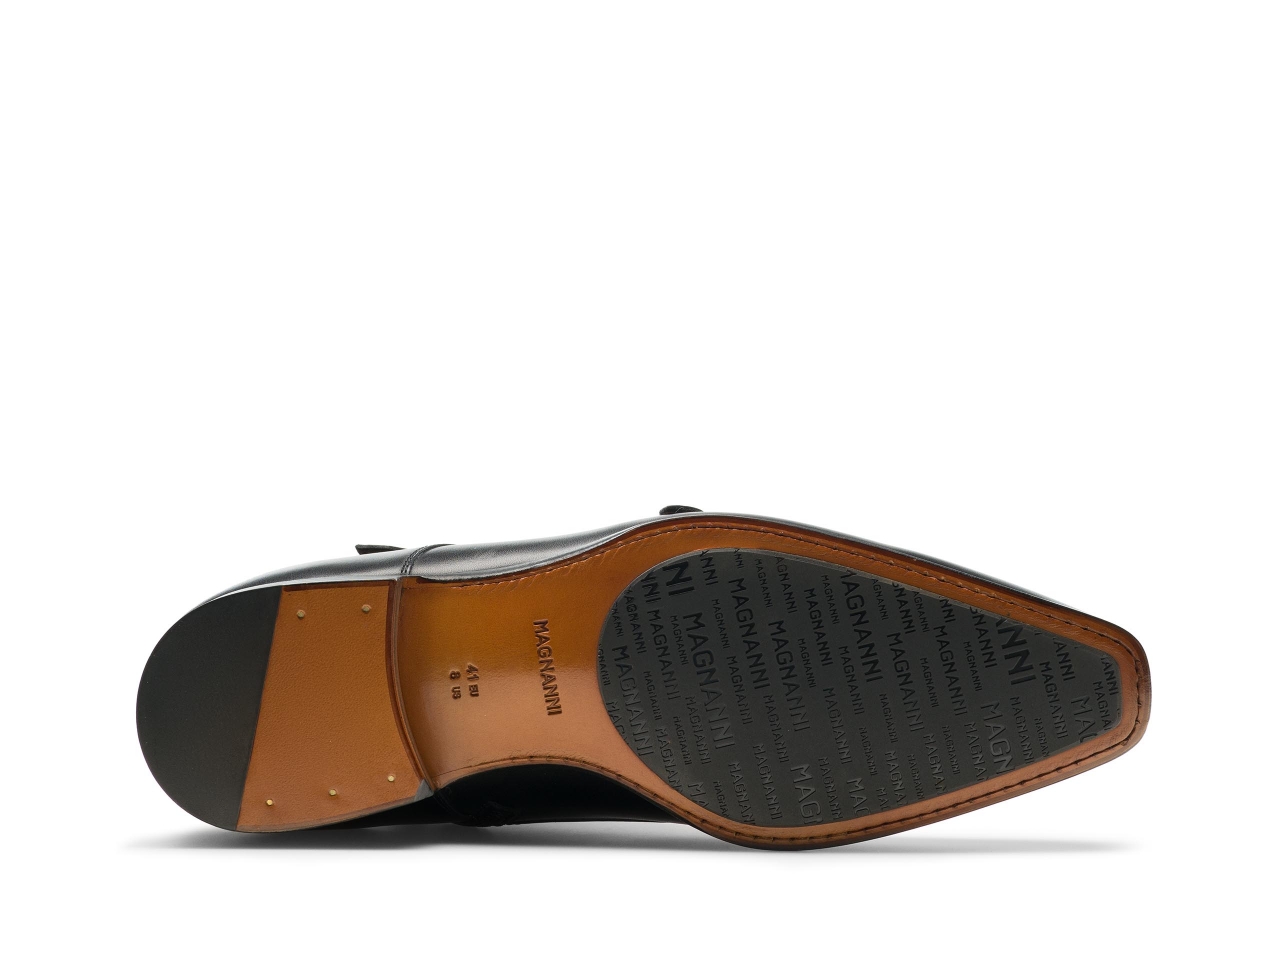 Sole of the Jagger Black